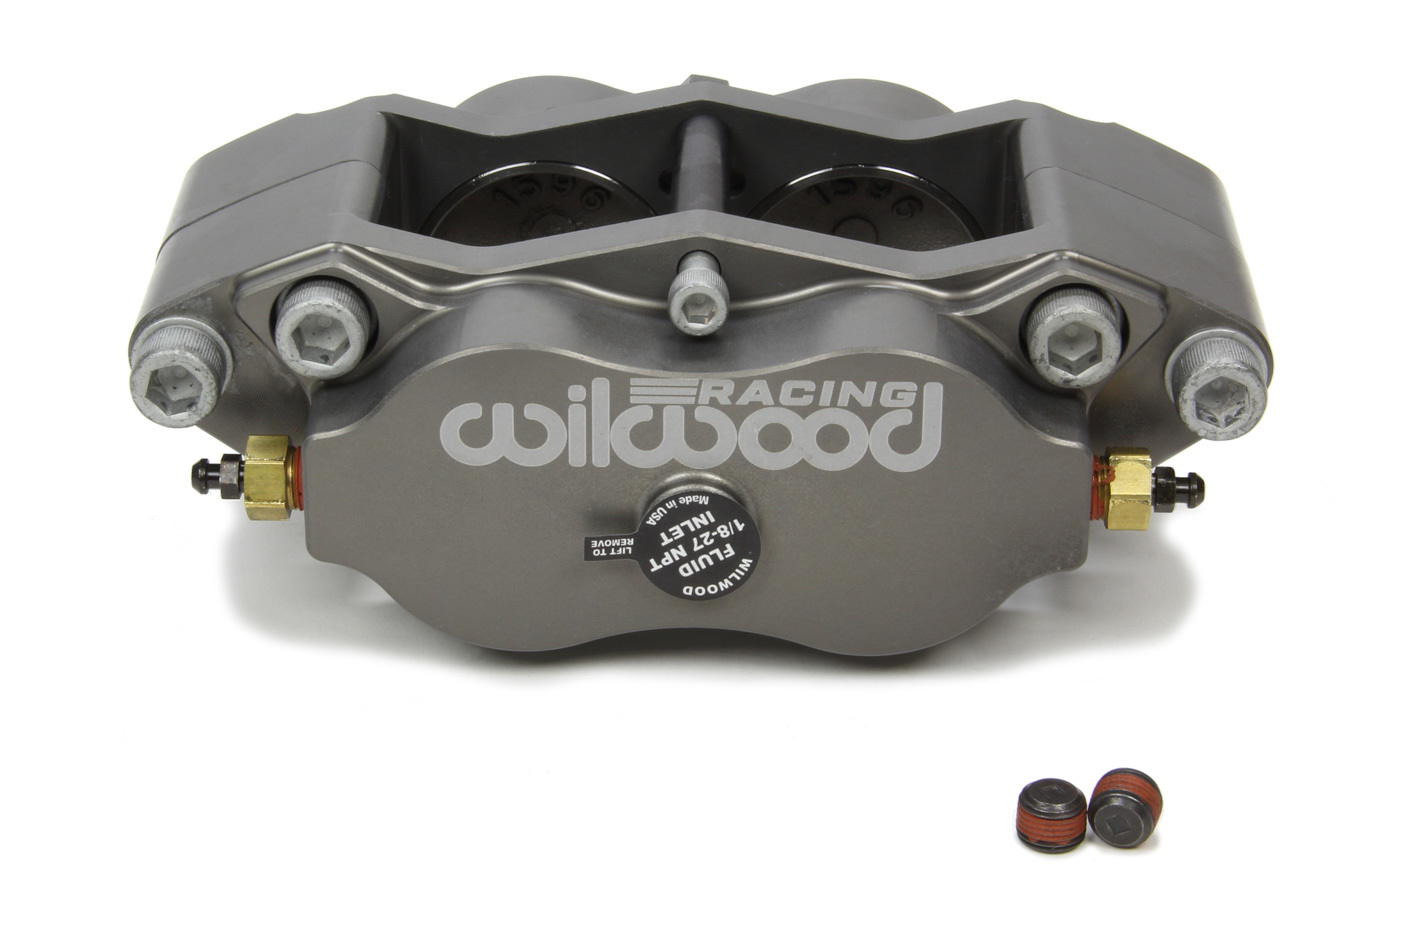 Wilwood 120-14764-SI Brake Caliper, Billet Narrow Dynalite, 4 Piston, Aluminum, Gray Anodized, 0.380 in Thick Rotor, 4.750 in Radial Mount, Each